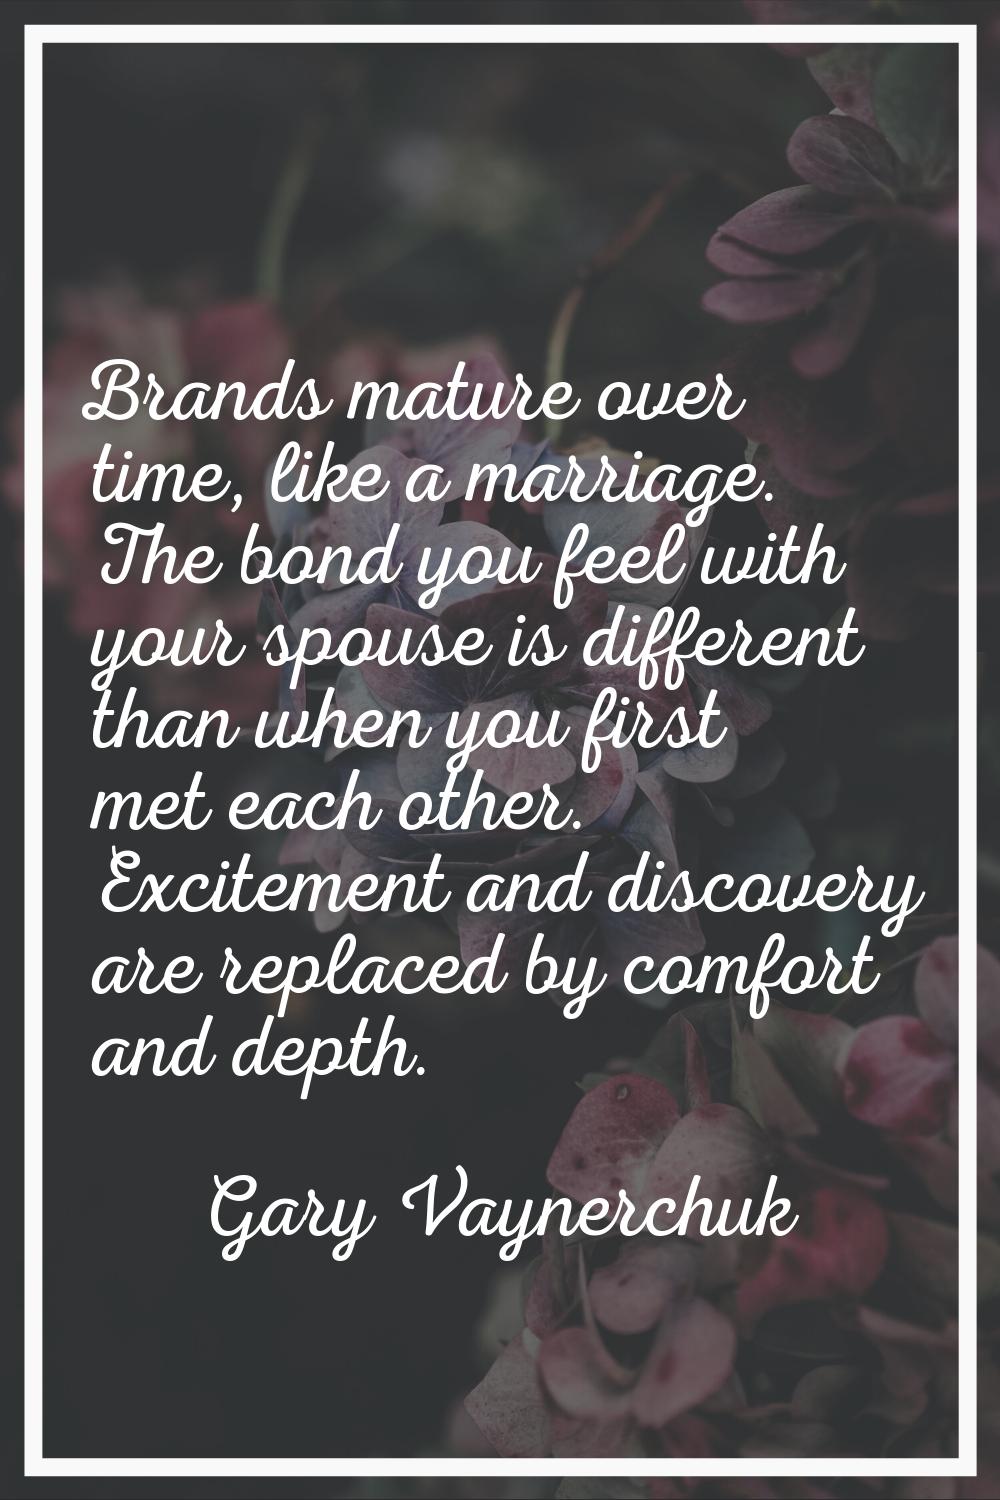 Brands mature over time, like a marriage. The bond you feel with your spouse is different than when